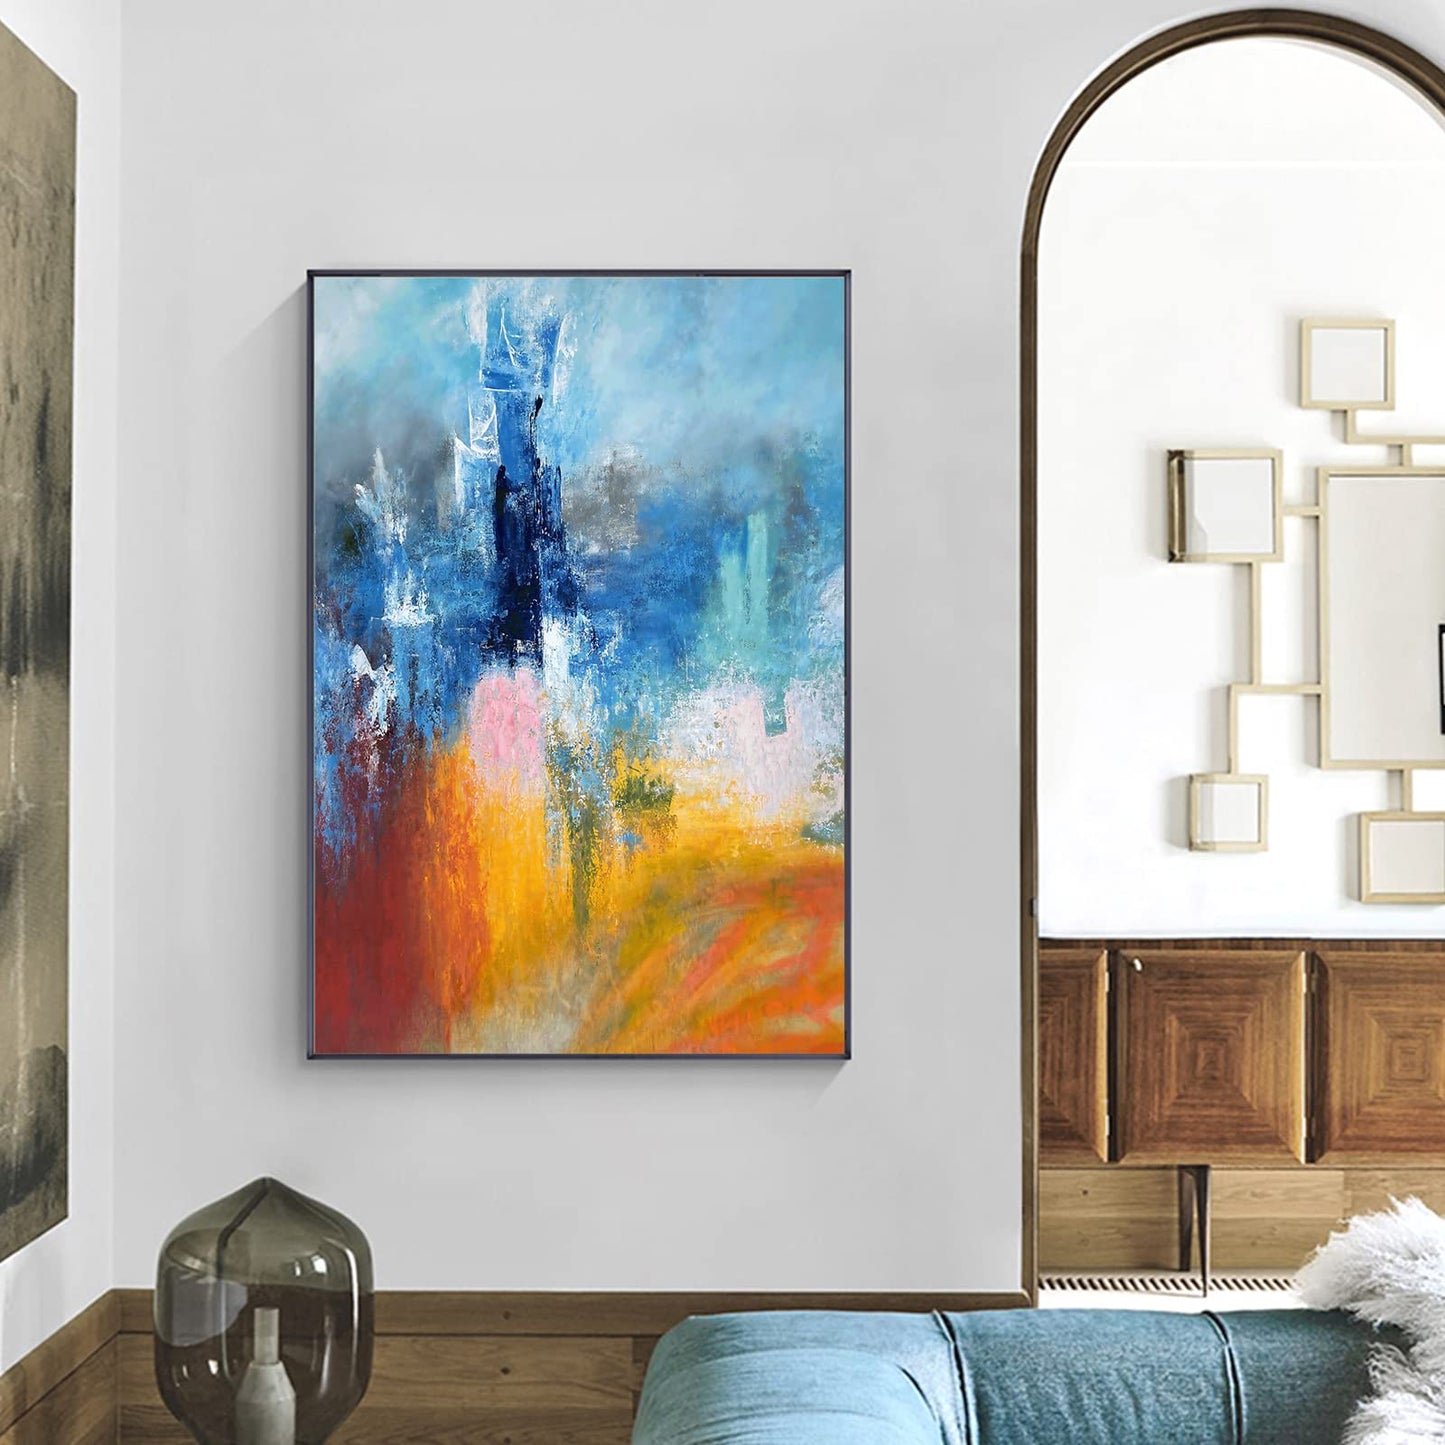 Abstract Blue Yellow Wall Art Dark Blue Art Prints Yellow and Blue Wall Paintings Modern Navy Blue Art Orange Yellow Posters Blue Watercolor Picture Navy Blue Modern Canvas Wall Art 16x24inch Unframed